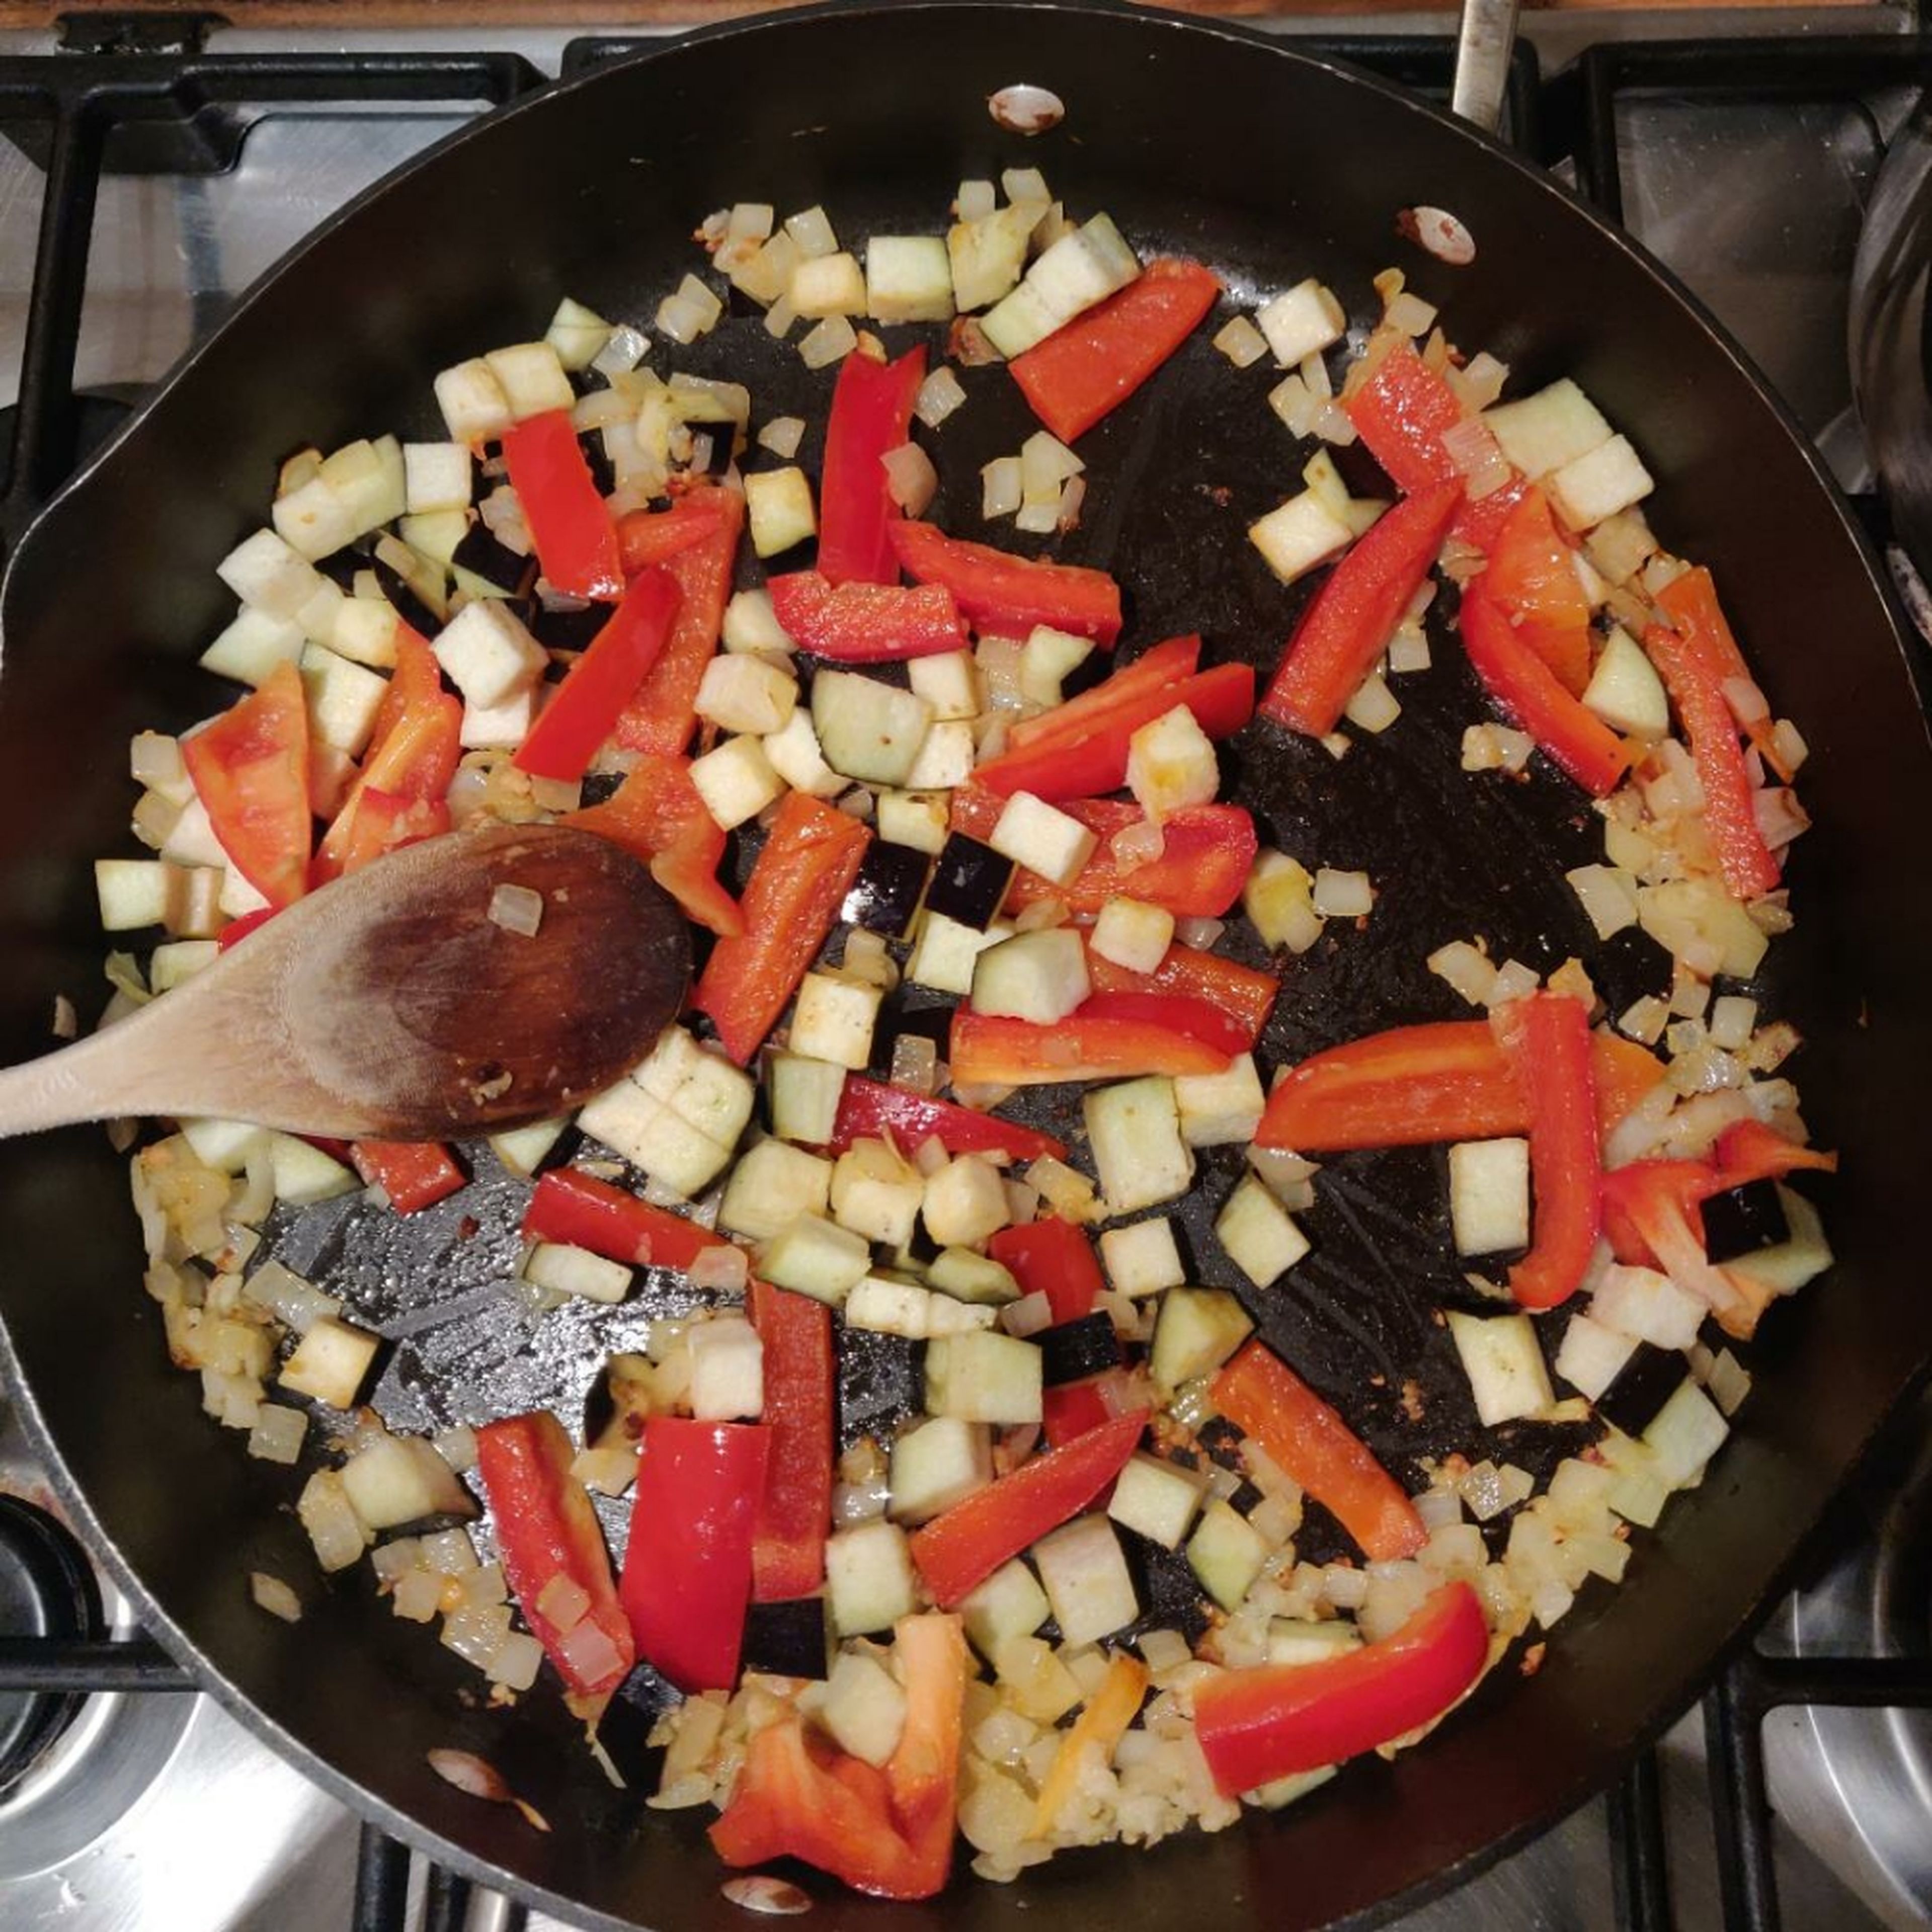 Finely chop onion, mince garlic and grate ginger. Heat olive oil in pan. Saute onion, garlic and ginger until fragrant. Add in chopped red bell pepper and cubed eggplant and saute for 3 to 5 mins.